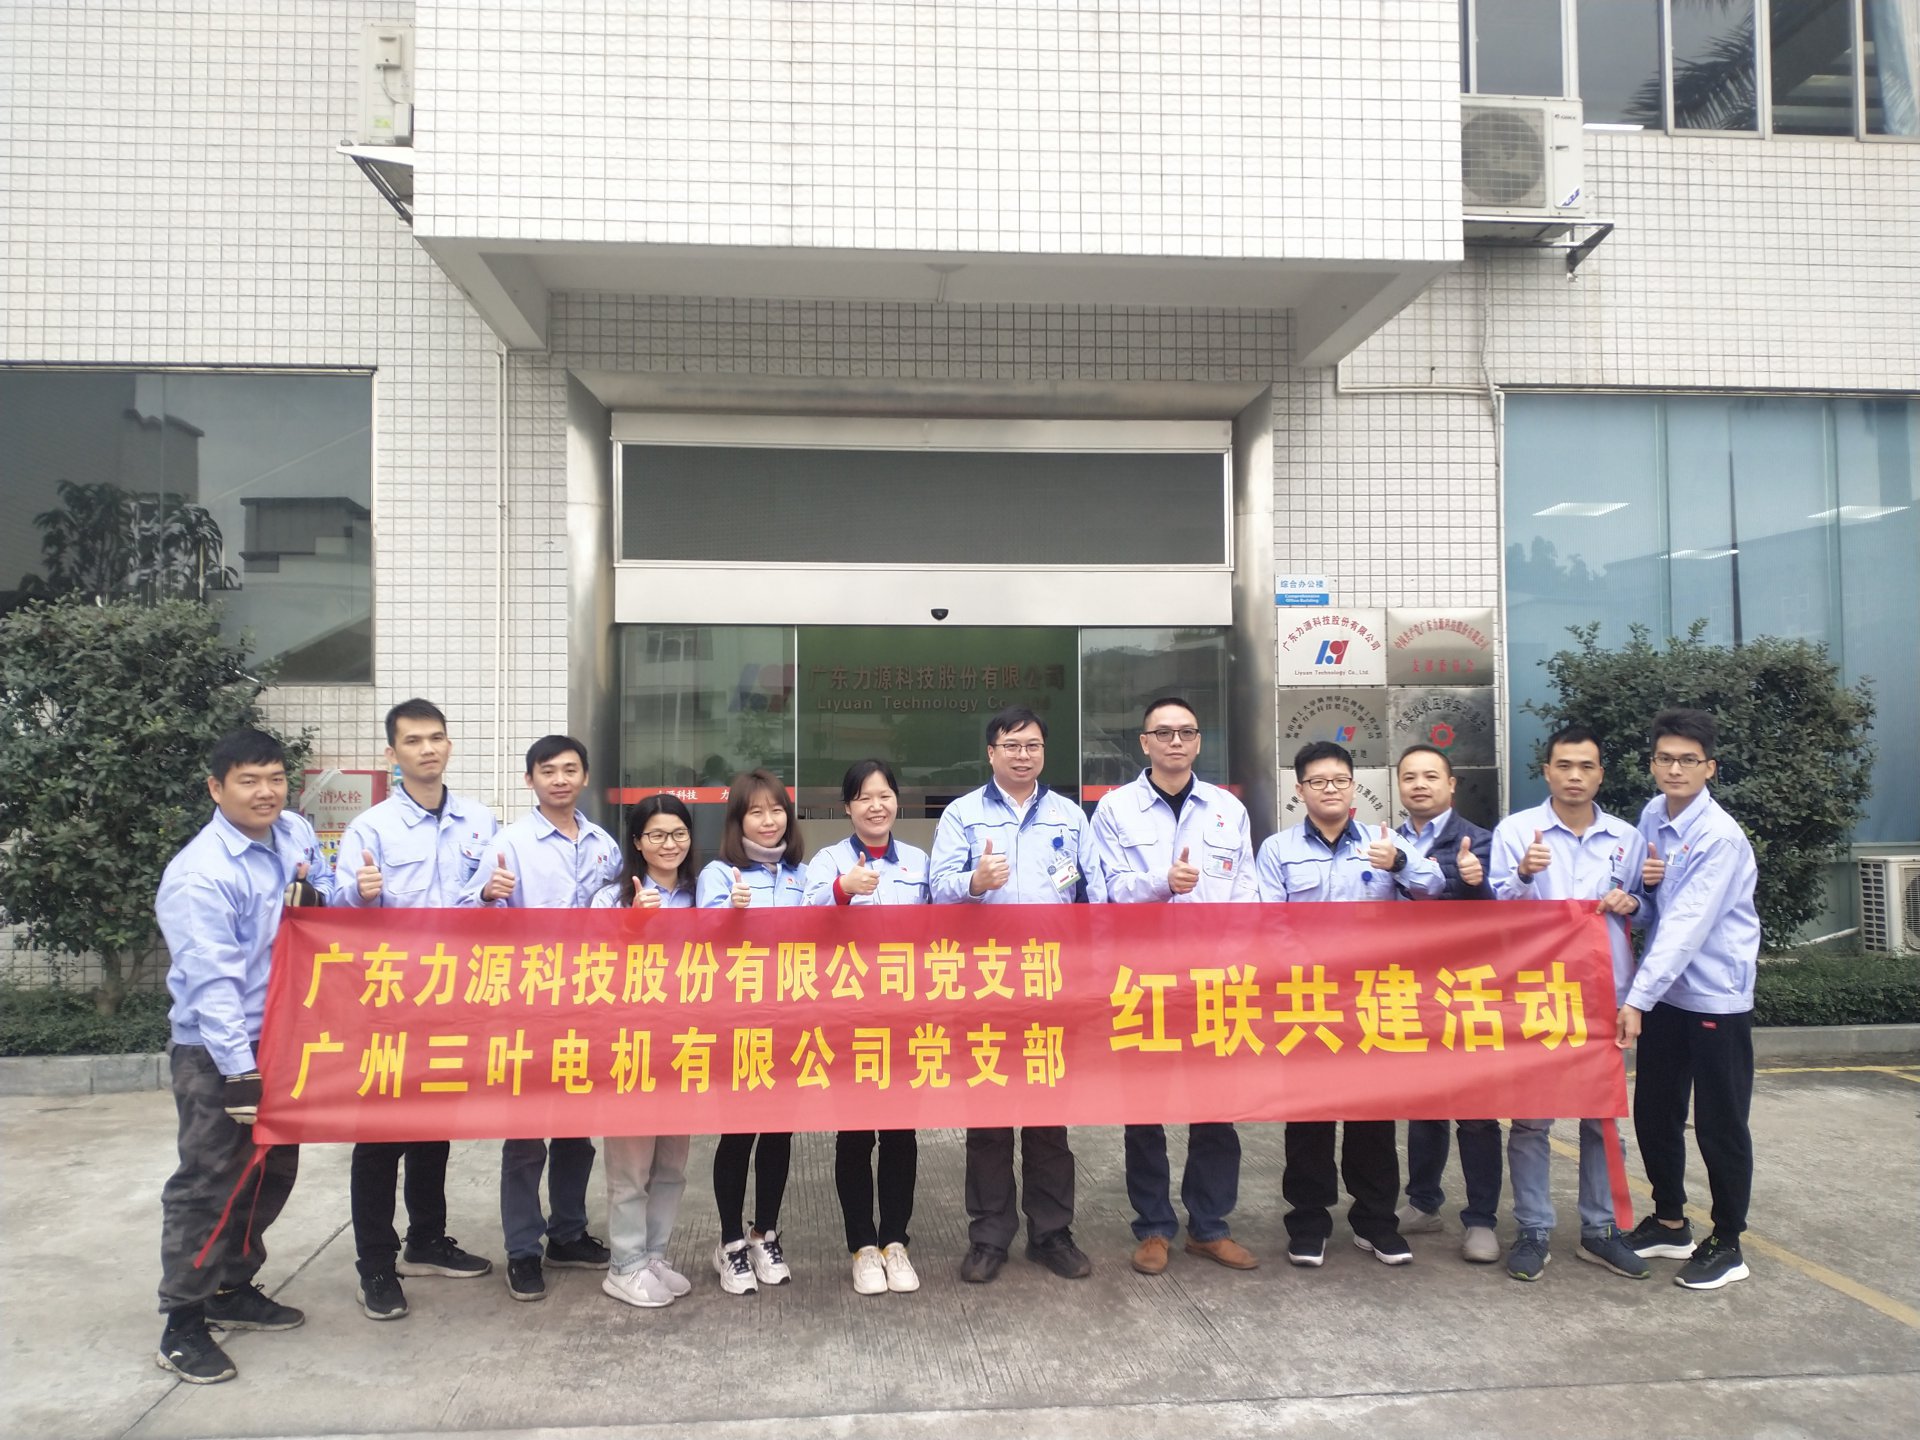 Guangdong Liyuan science and technology Party branch and Guangzhou Sanye Party branch carry out joint construction activities of red League